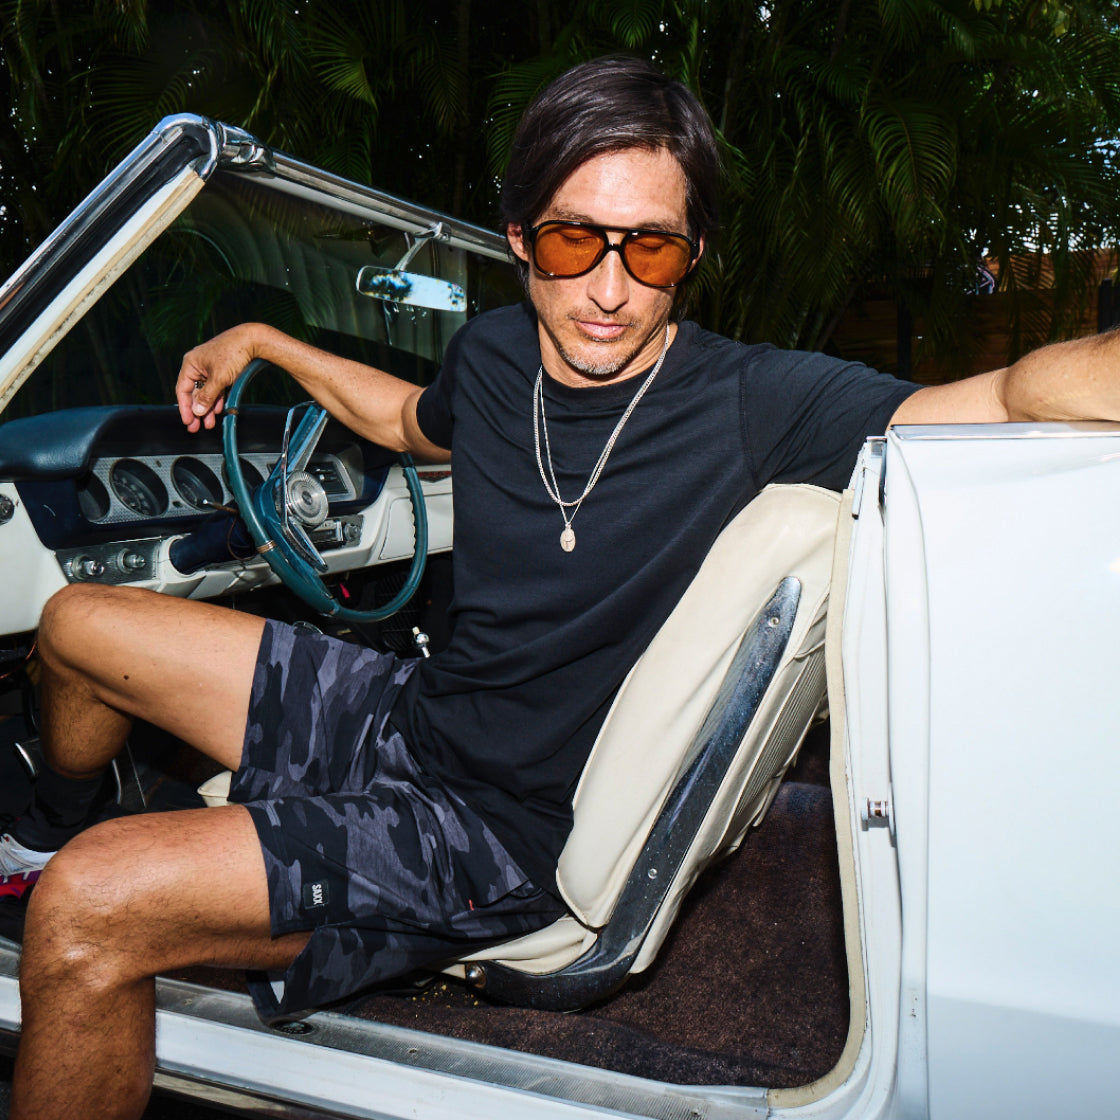 A man with sunglasses on getting out of a vintage sports car wearing athletic shorts and a plain t-shirt in a tropical setting.